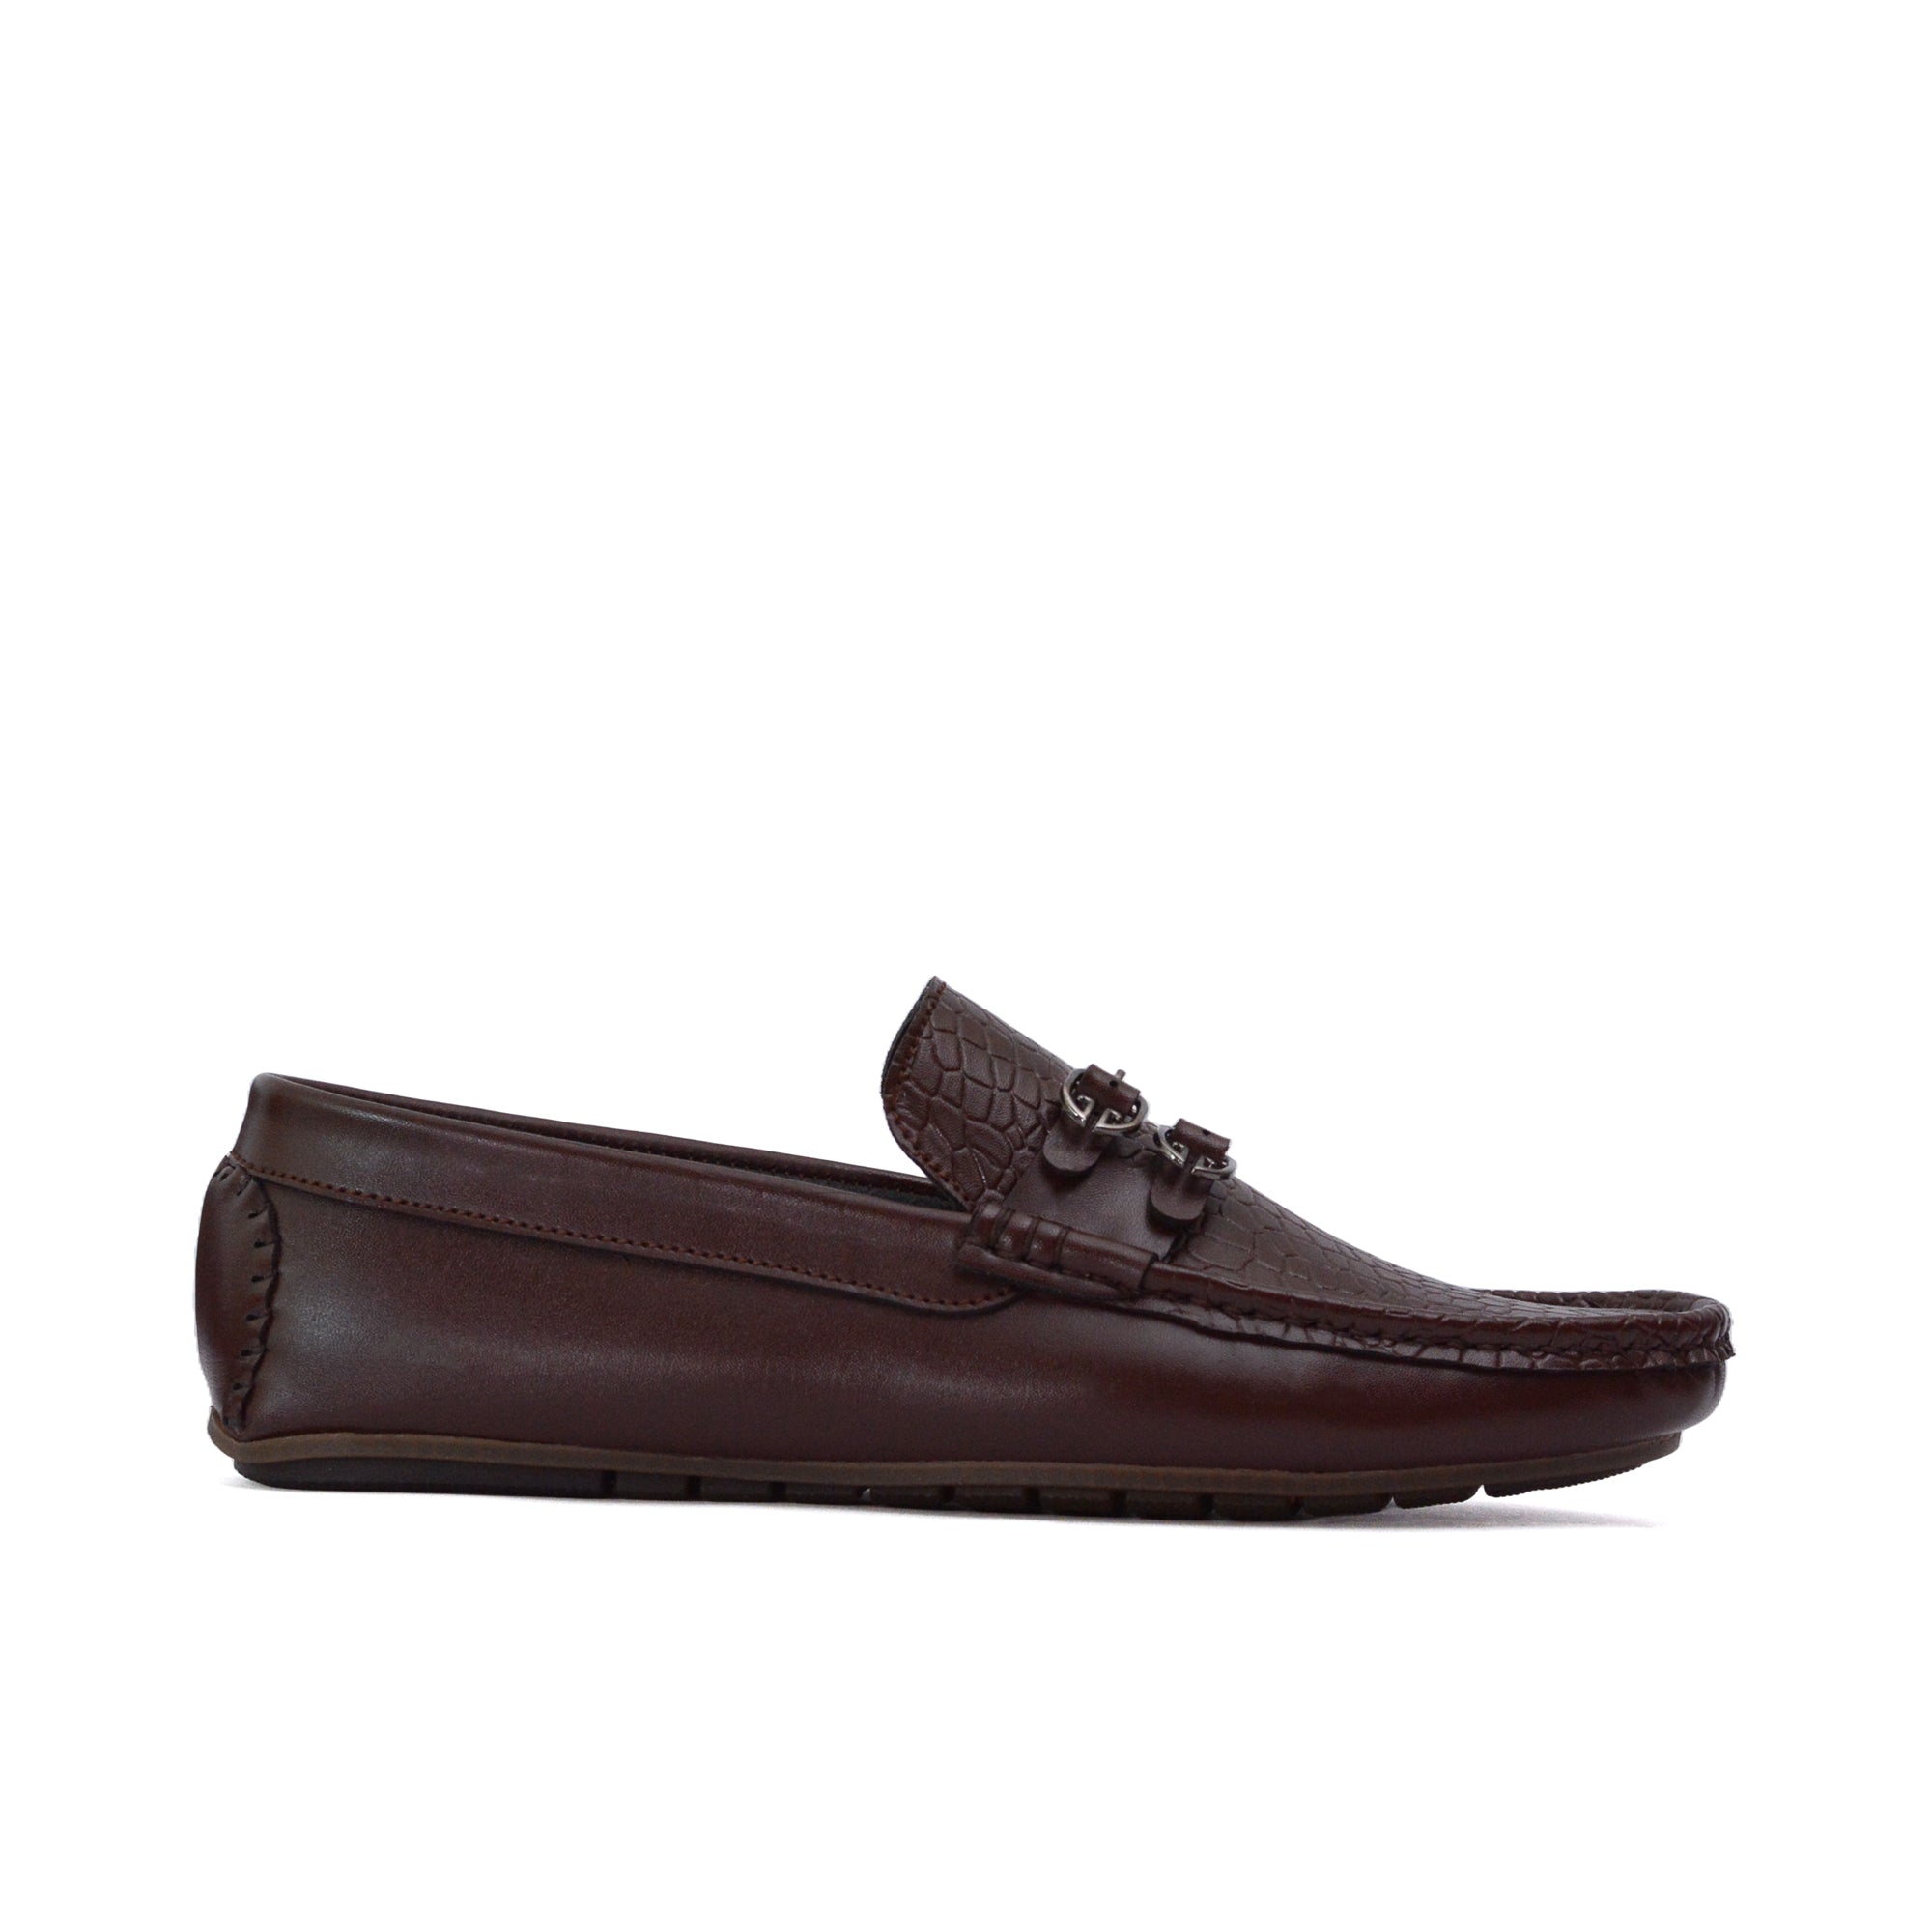 Brown Buckle Crafted Loafer LS04